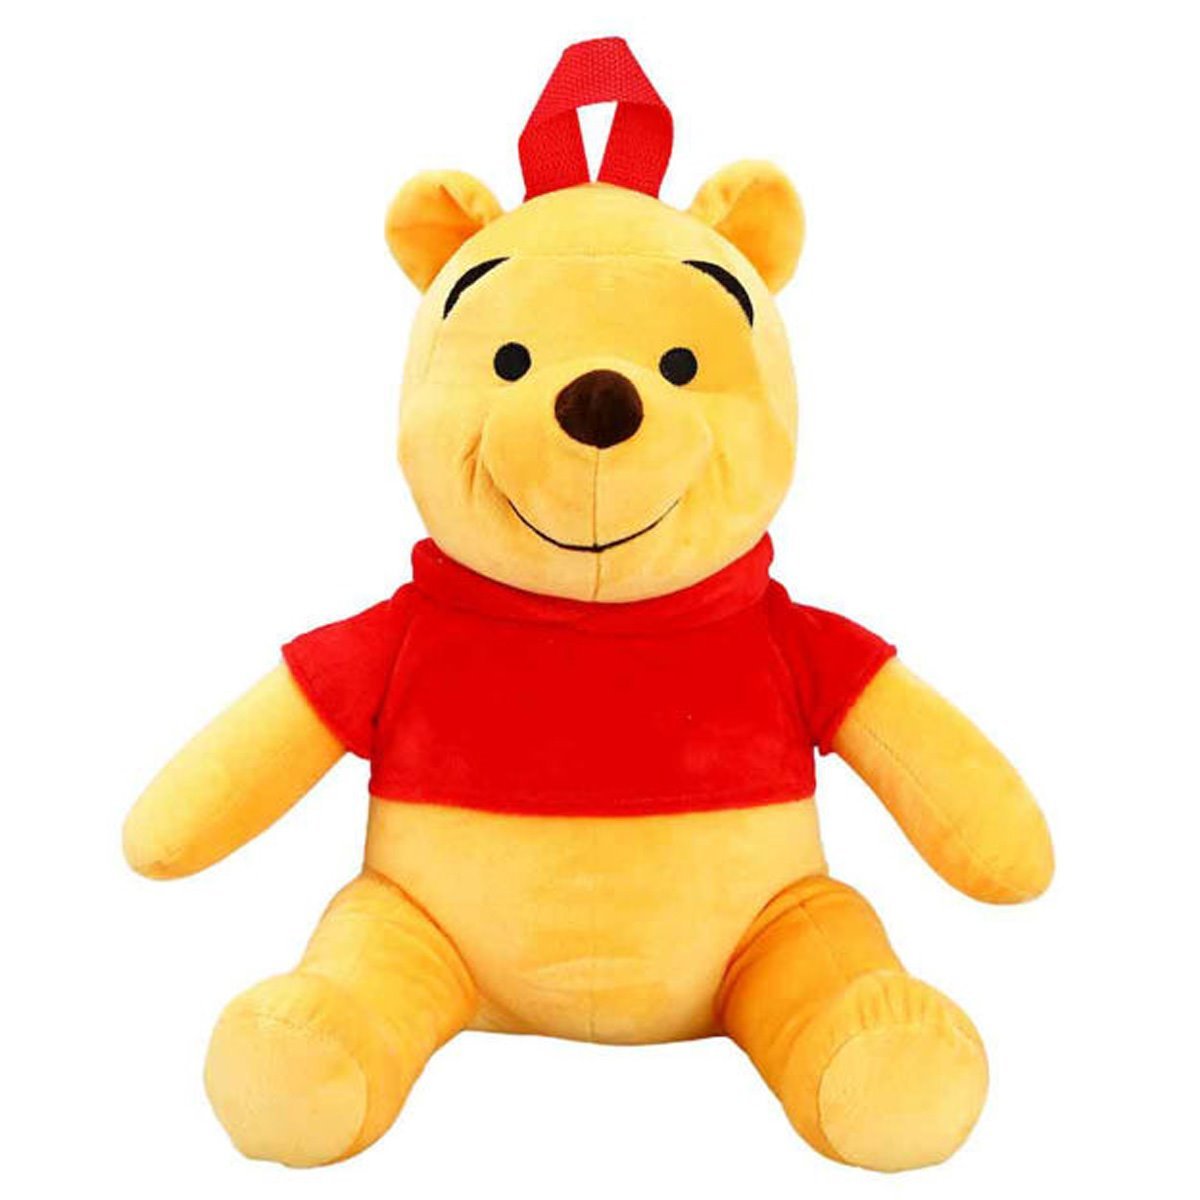 Winnie the Pooh 17-Inch Plush Backpack - Entertainment Earth